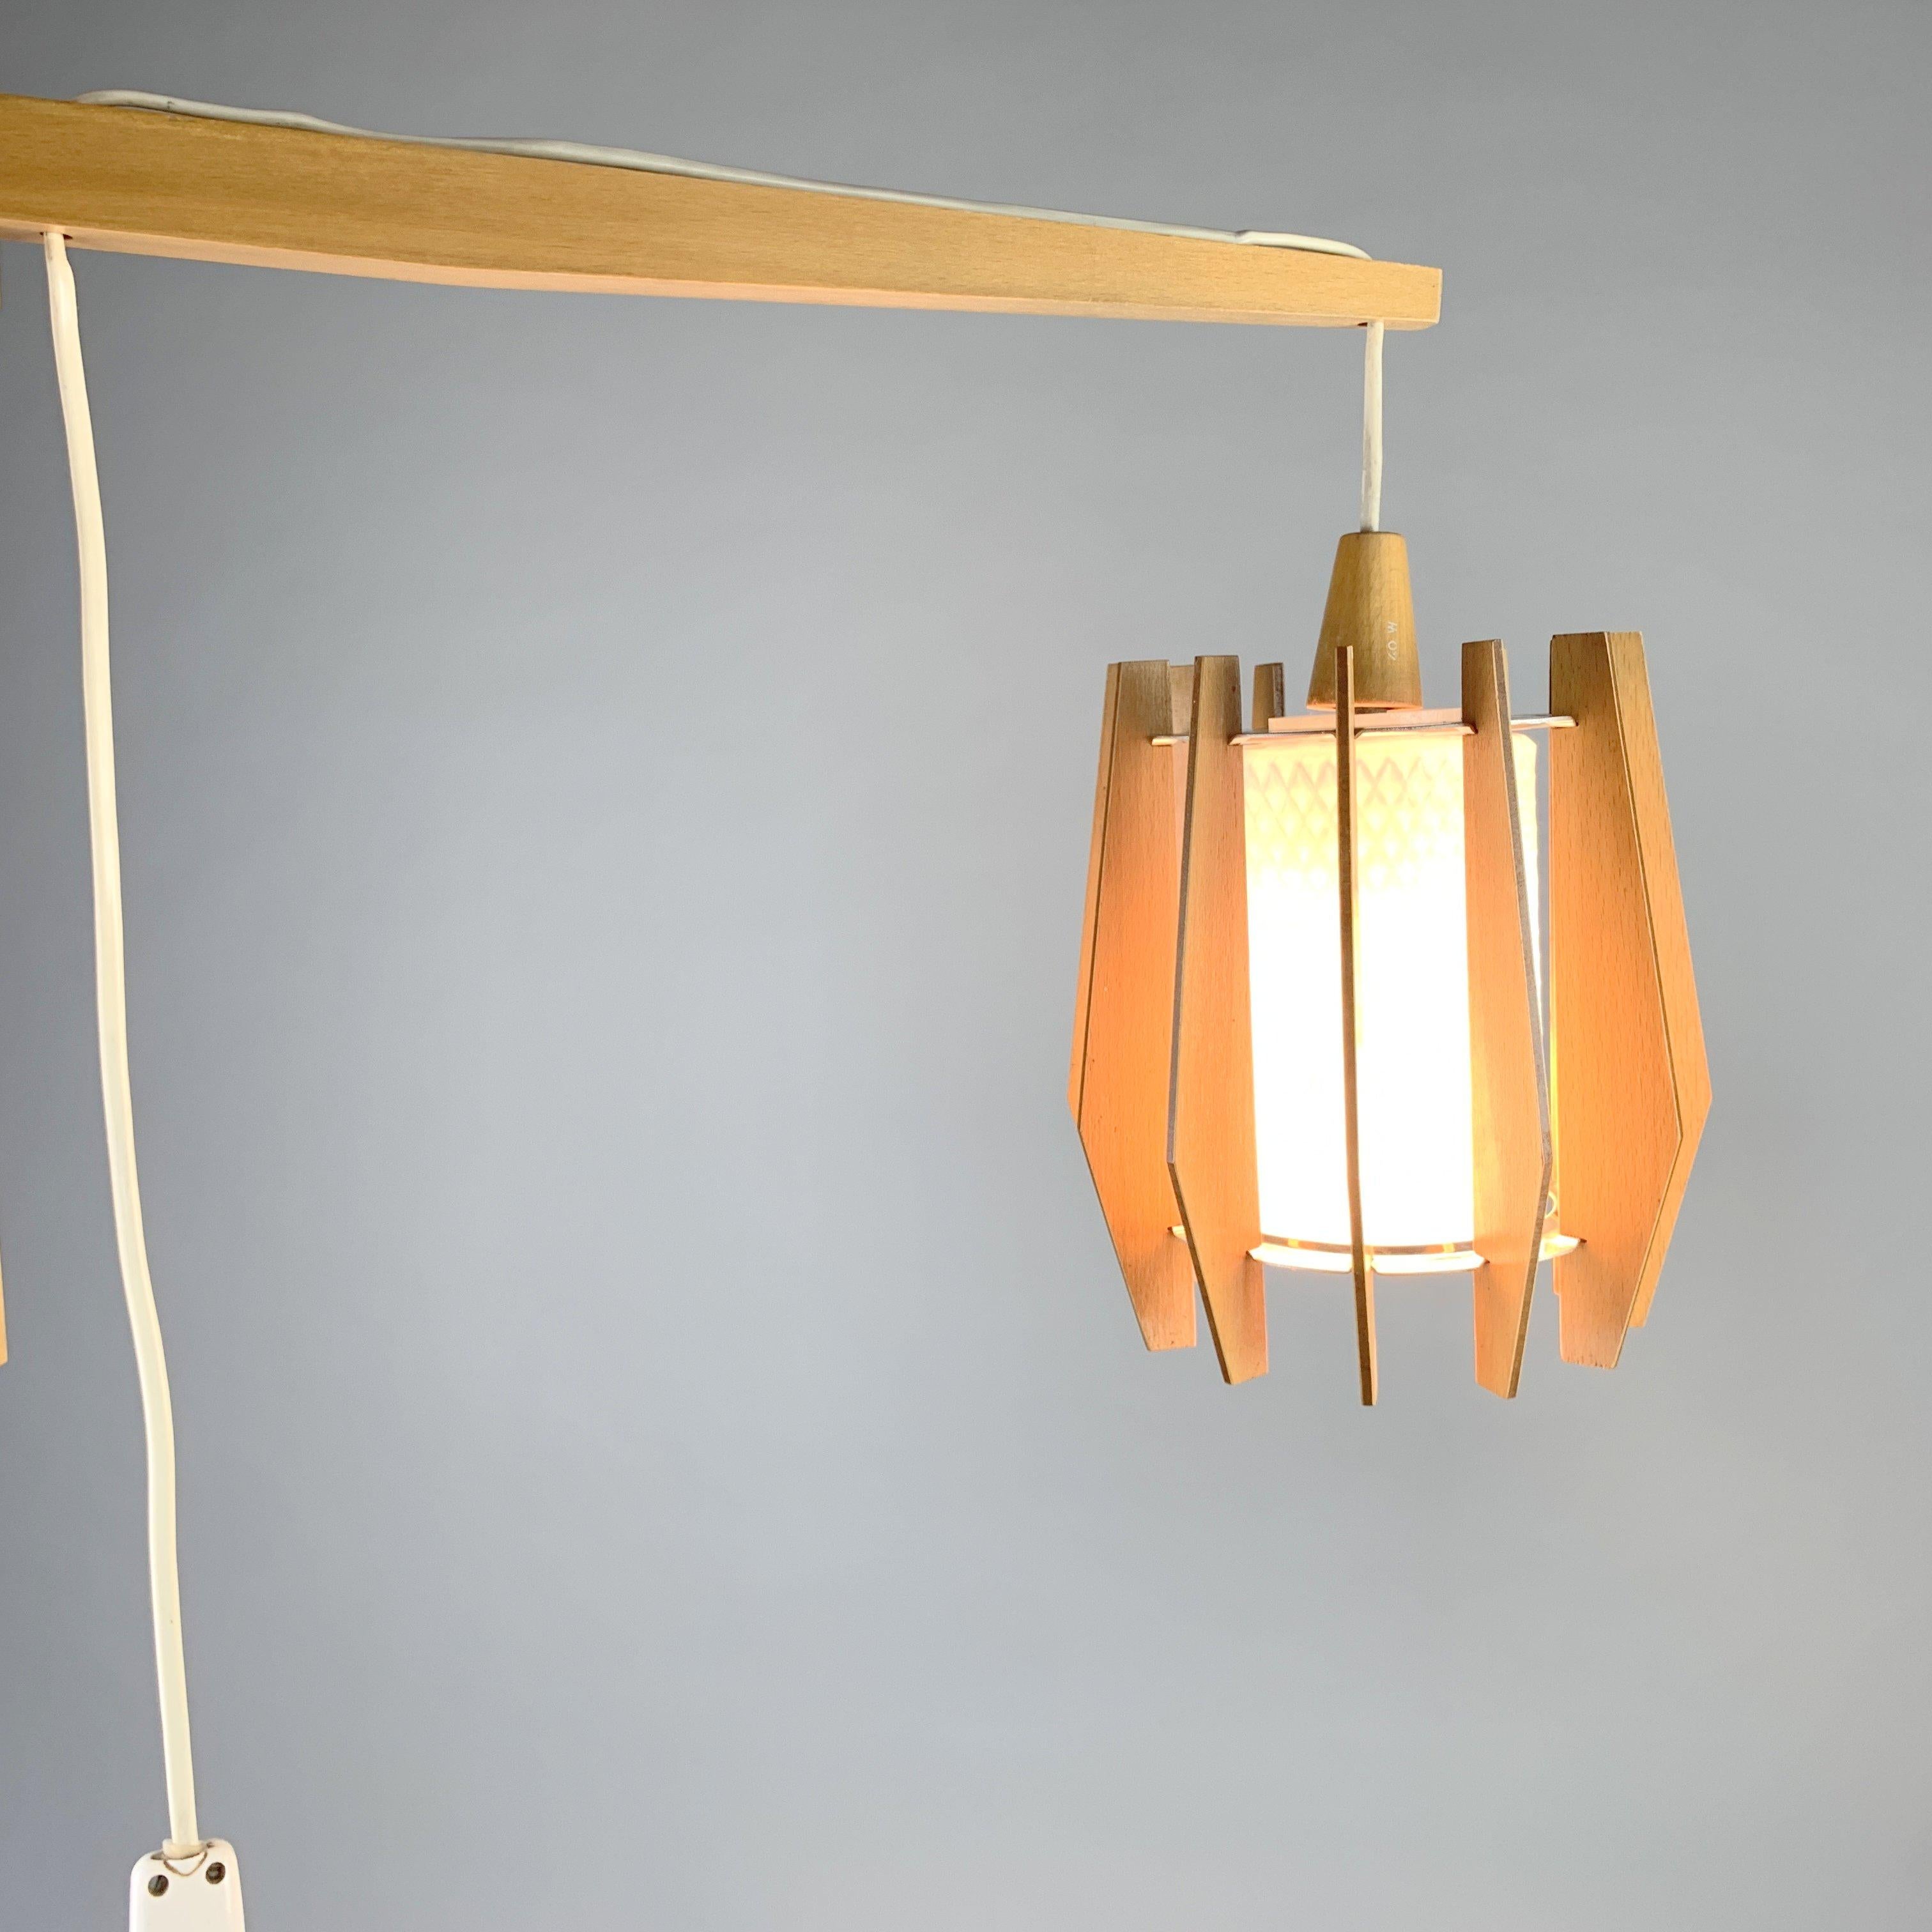 Vintage wooden lamp manufactured by Drevo Humpolec in former Czechoslovakia in 1960s. Very good original condition.